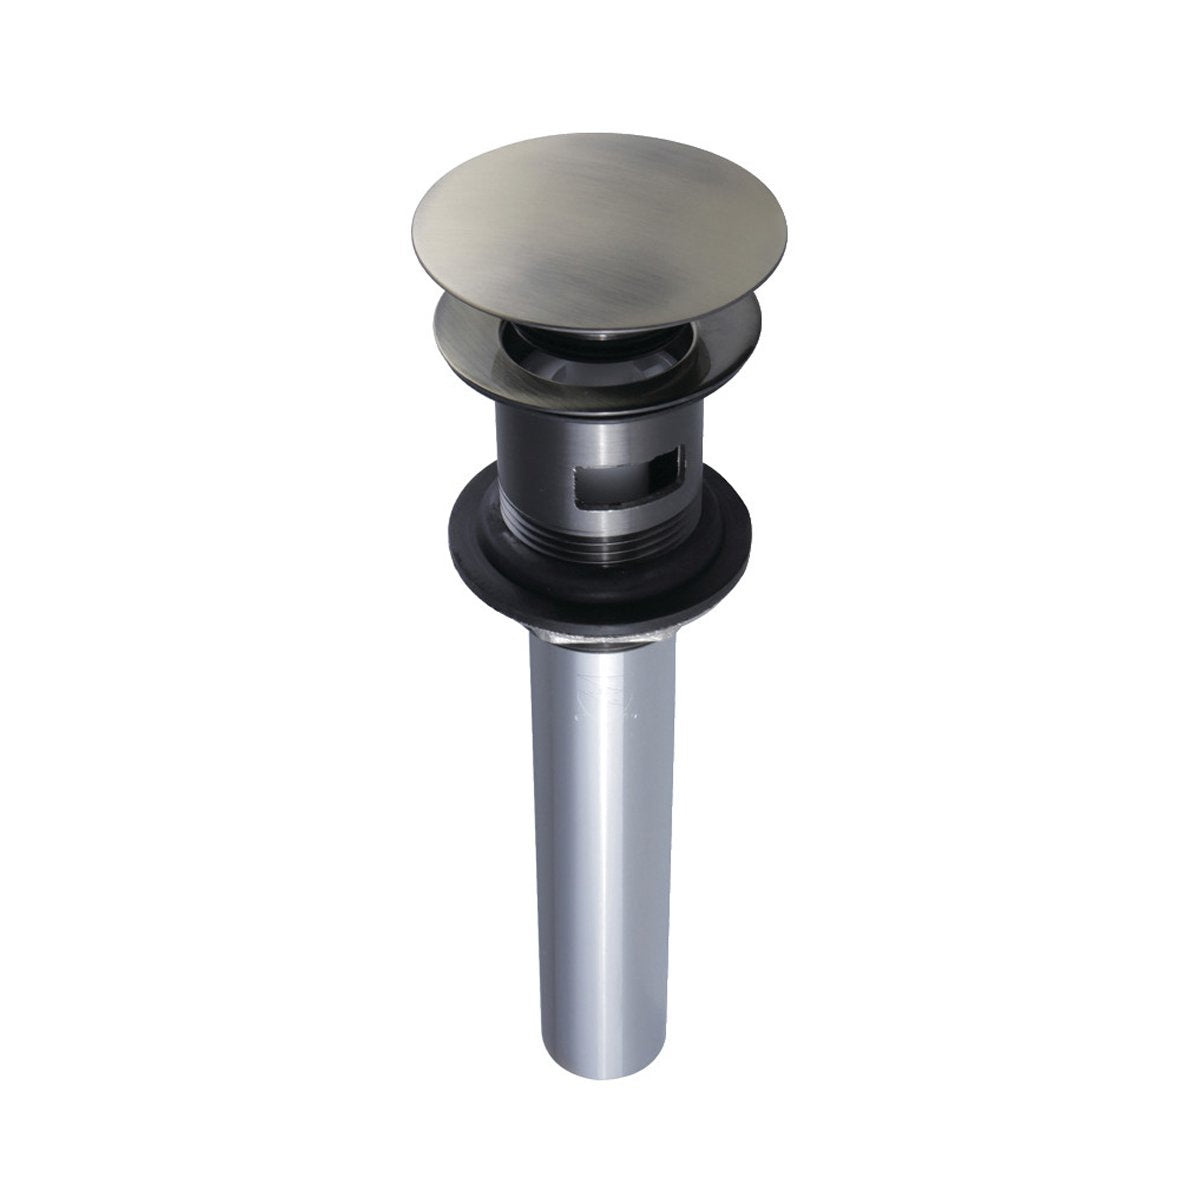 Kingston Brass Push Pop-Up Drain with Overflow Hole